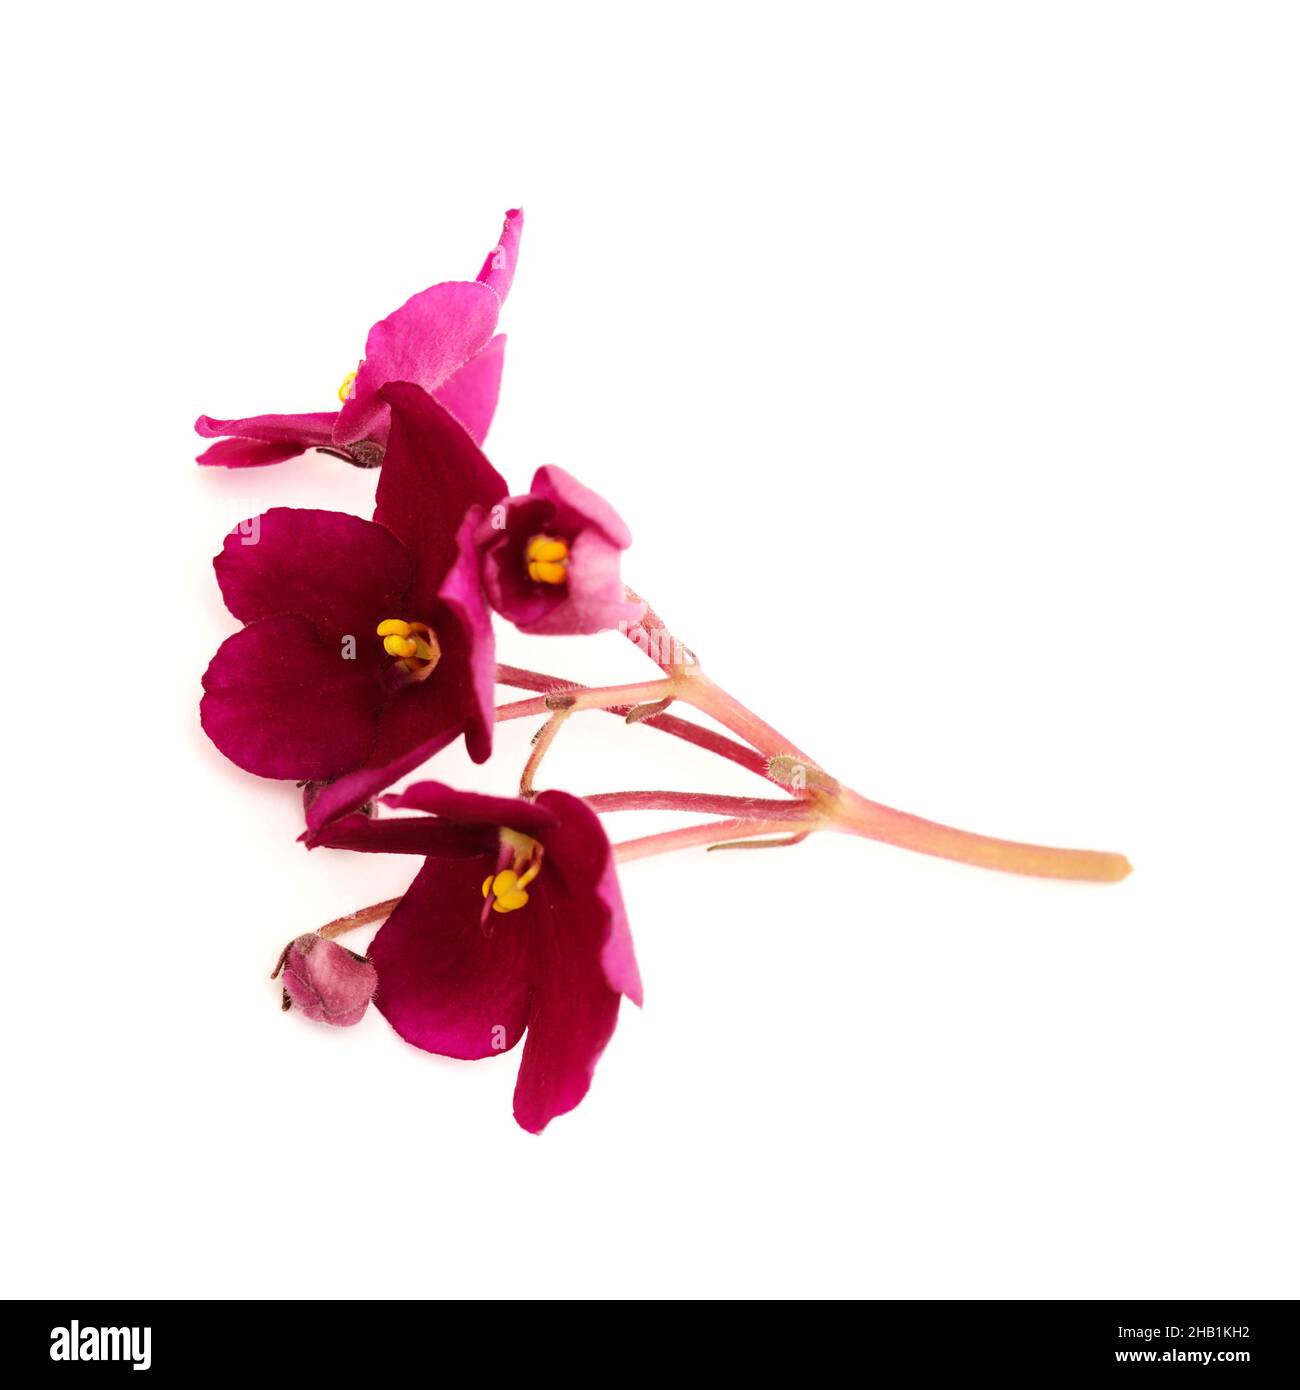 Dark red saintpaulia or african violet isolated on white background Stock Photo